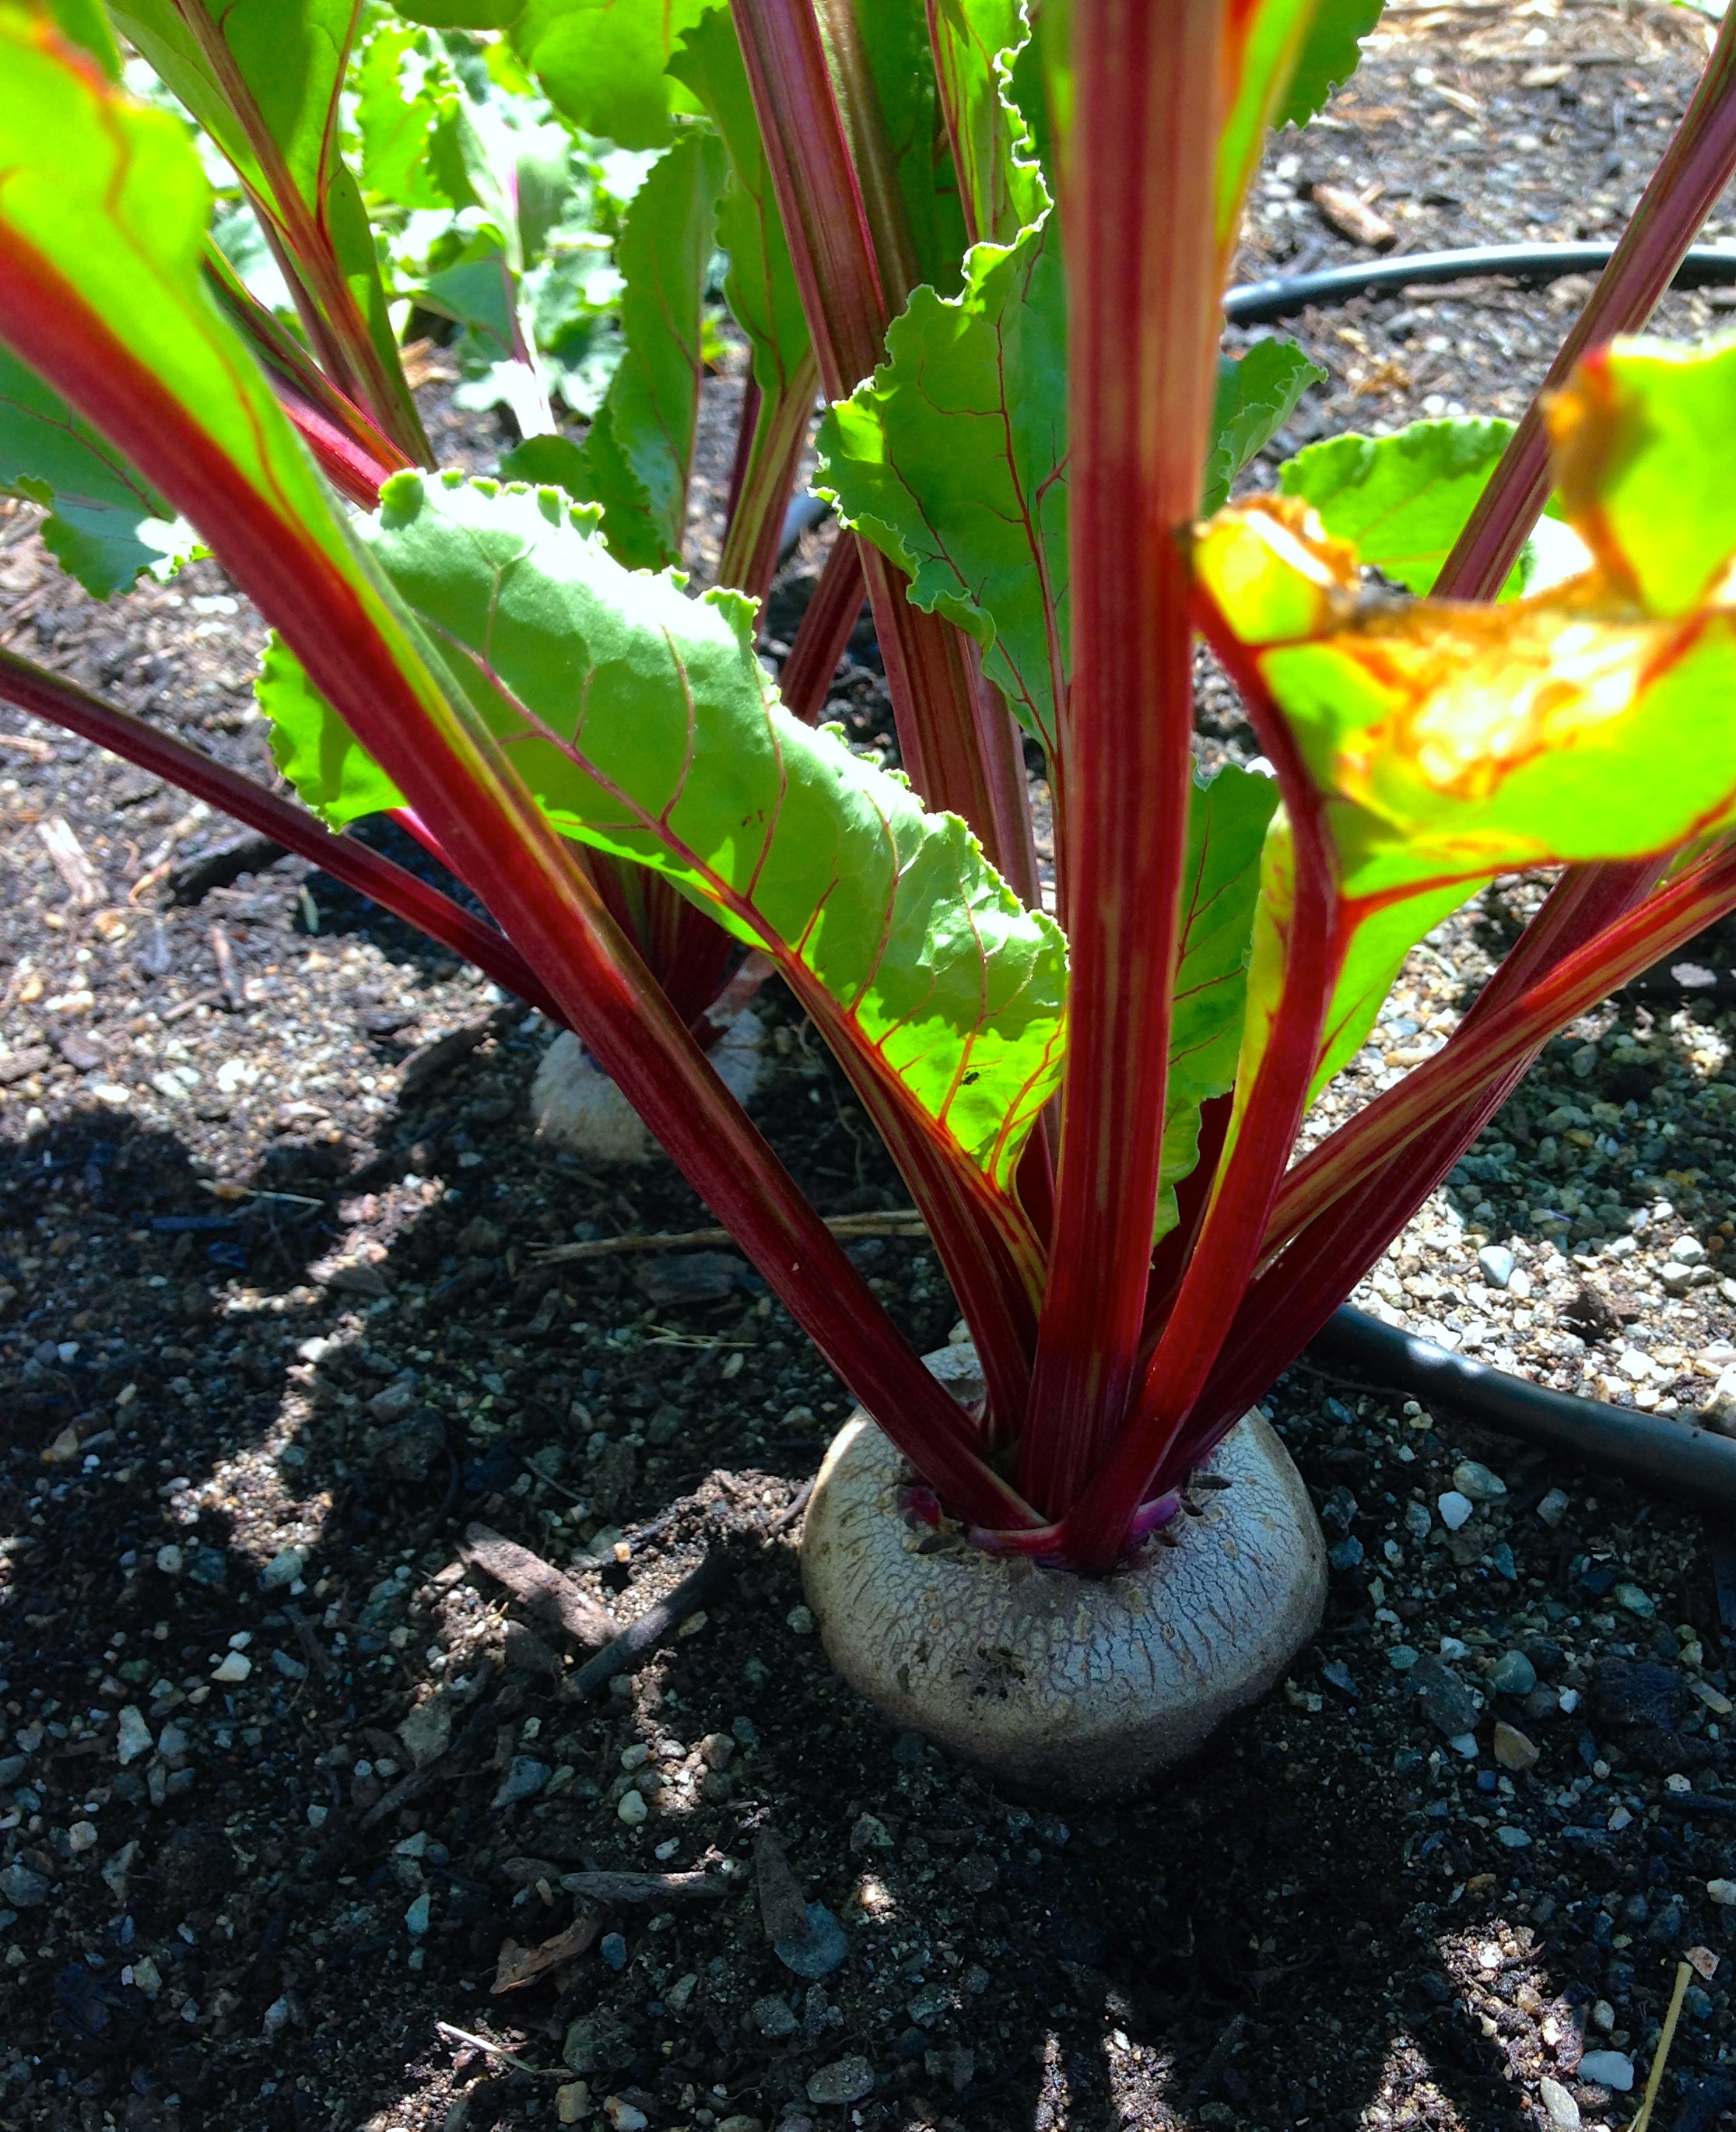 Here are some beets from the 21 Acres children’s garden. Also notice the drip irrigation system!